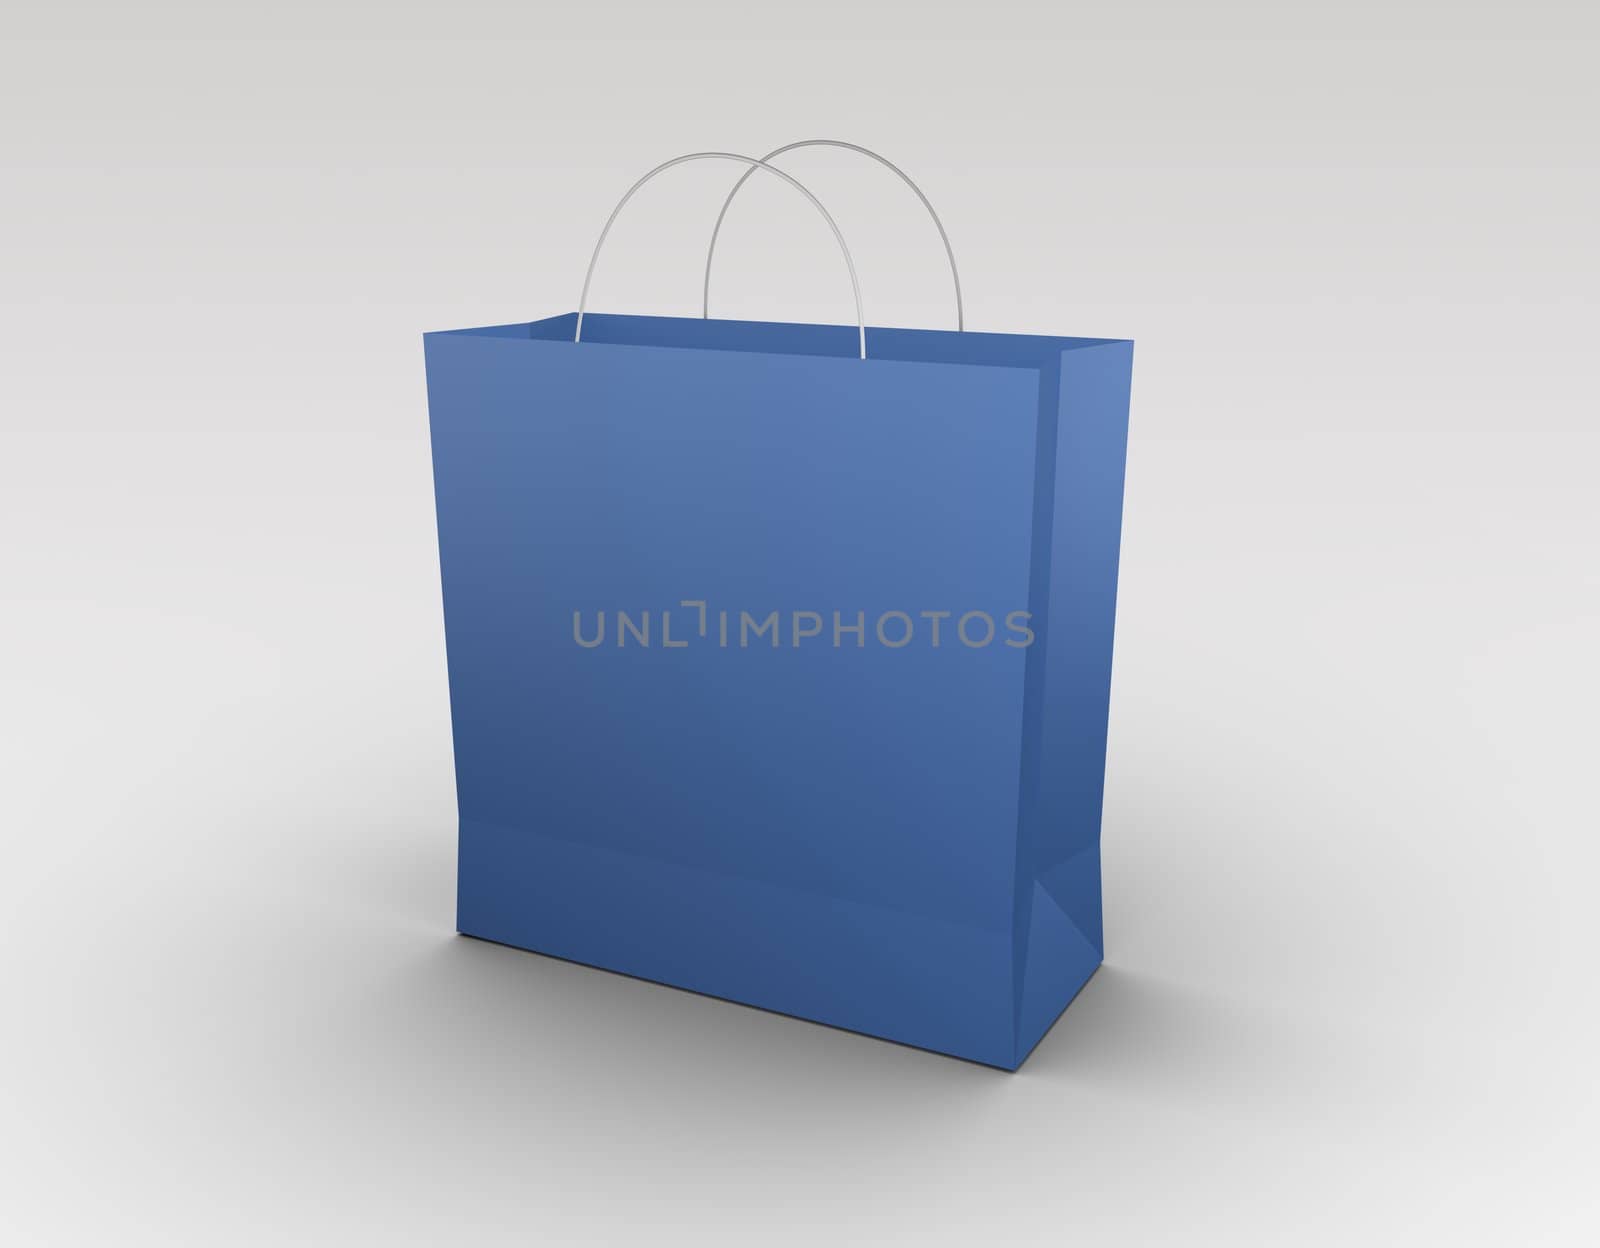 Blue shopping bag. High quality 3D rendered image.
